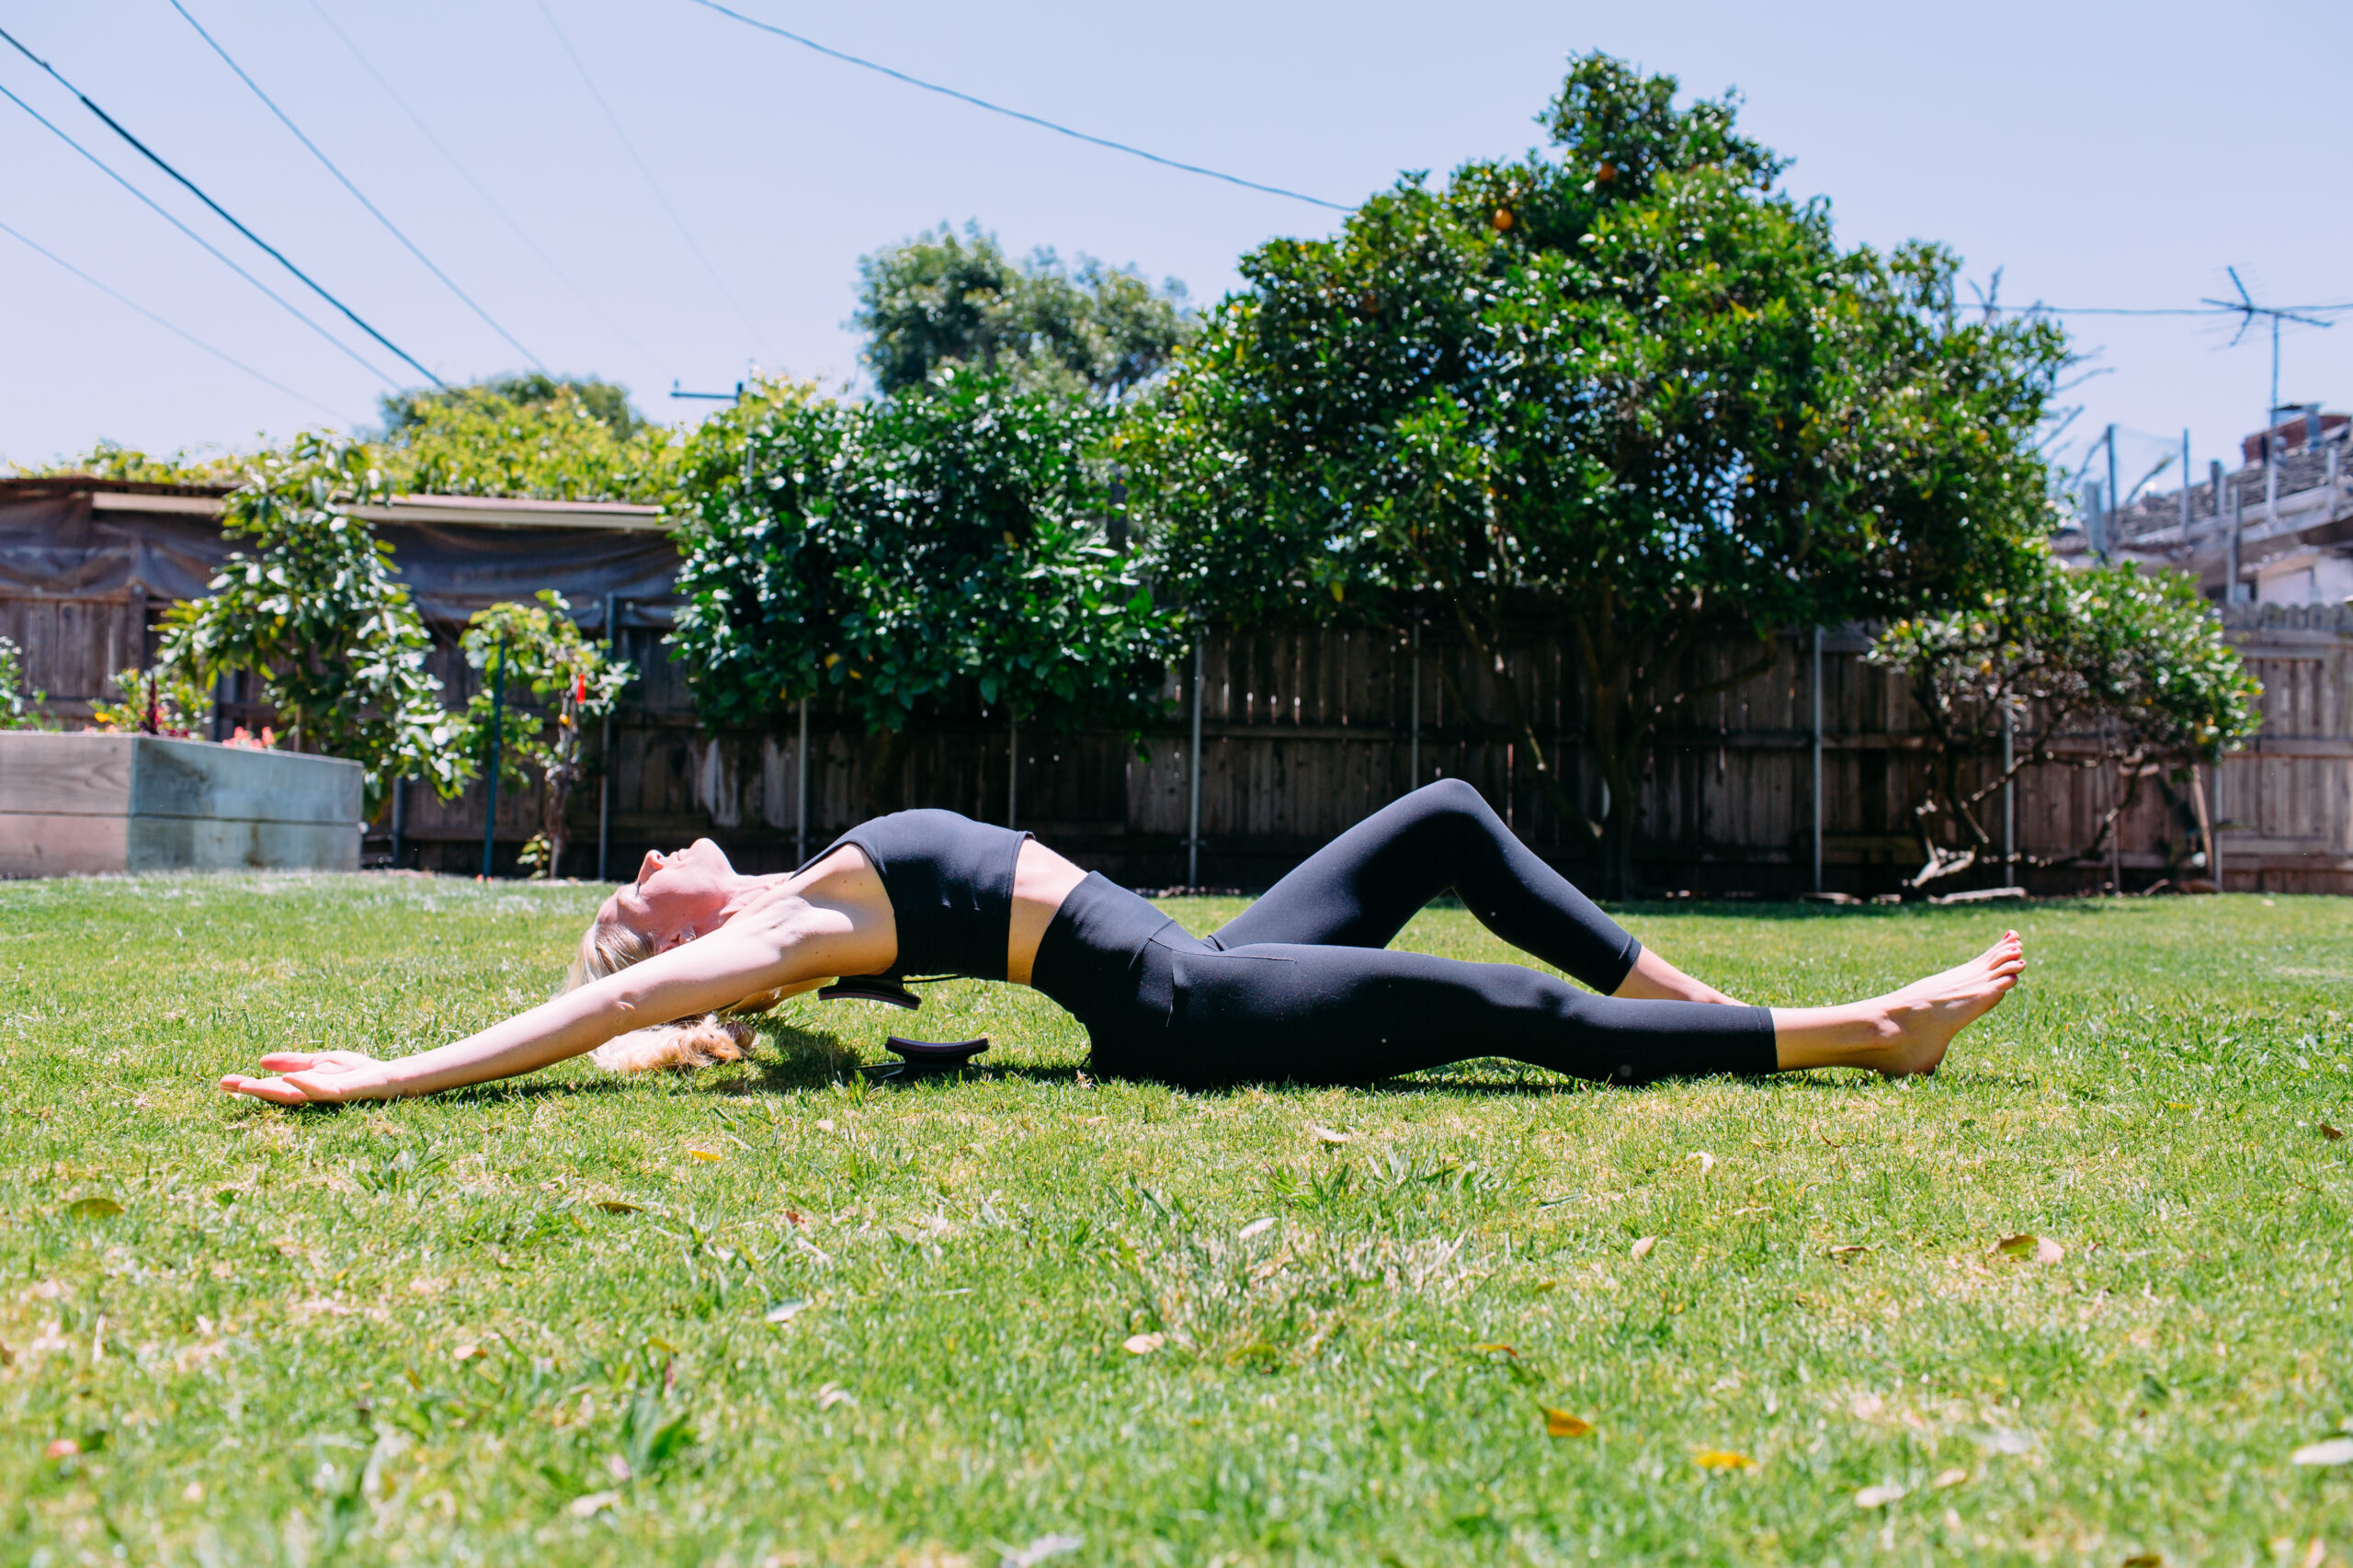 Woman stretching with a pilates ring outside on the grass with trees in the background.